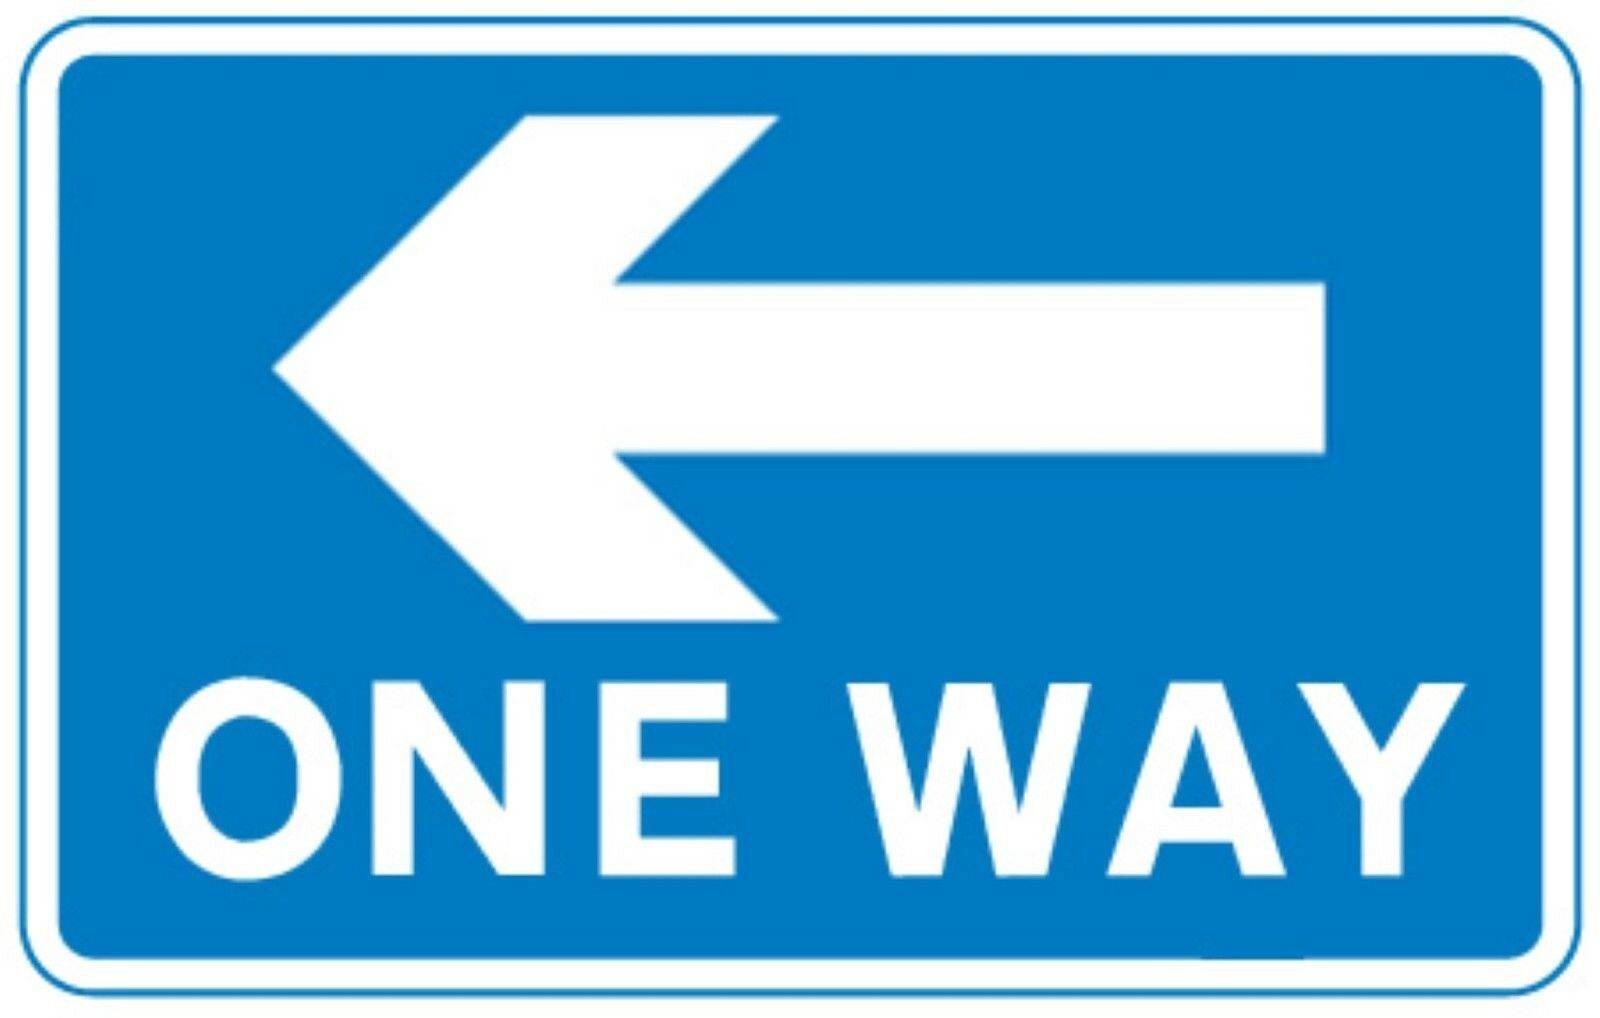 One Way Road Traffic Warning Sign Self Adhesive Sticker ...
 One Way Street Signs